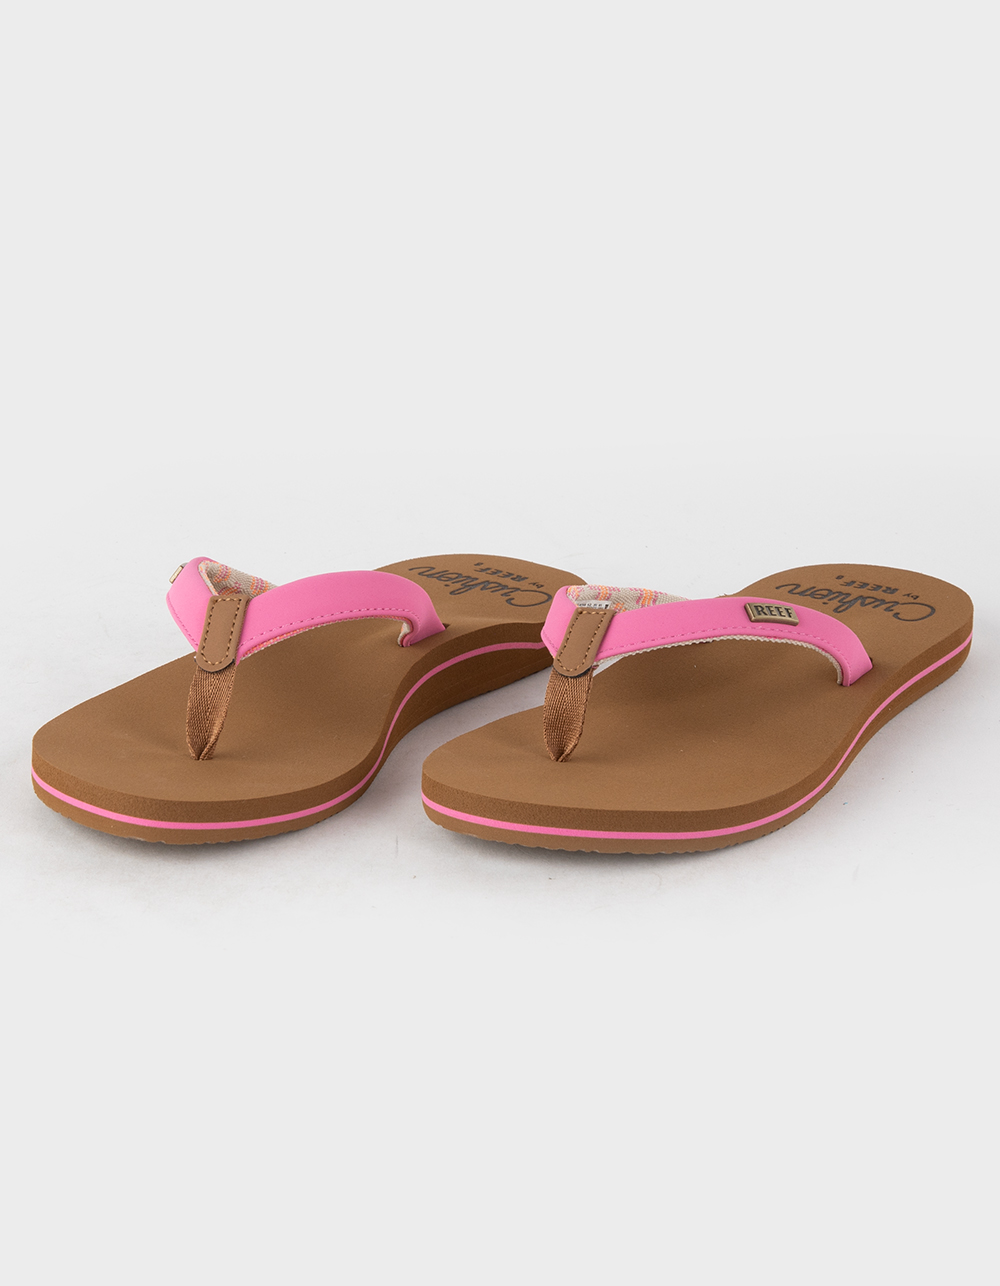 REEF Cushion Sands Thong Sandals - PINK |